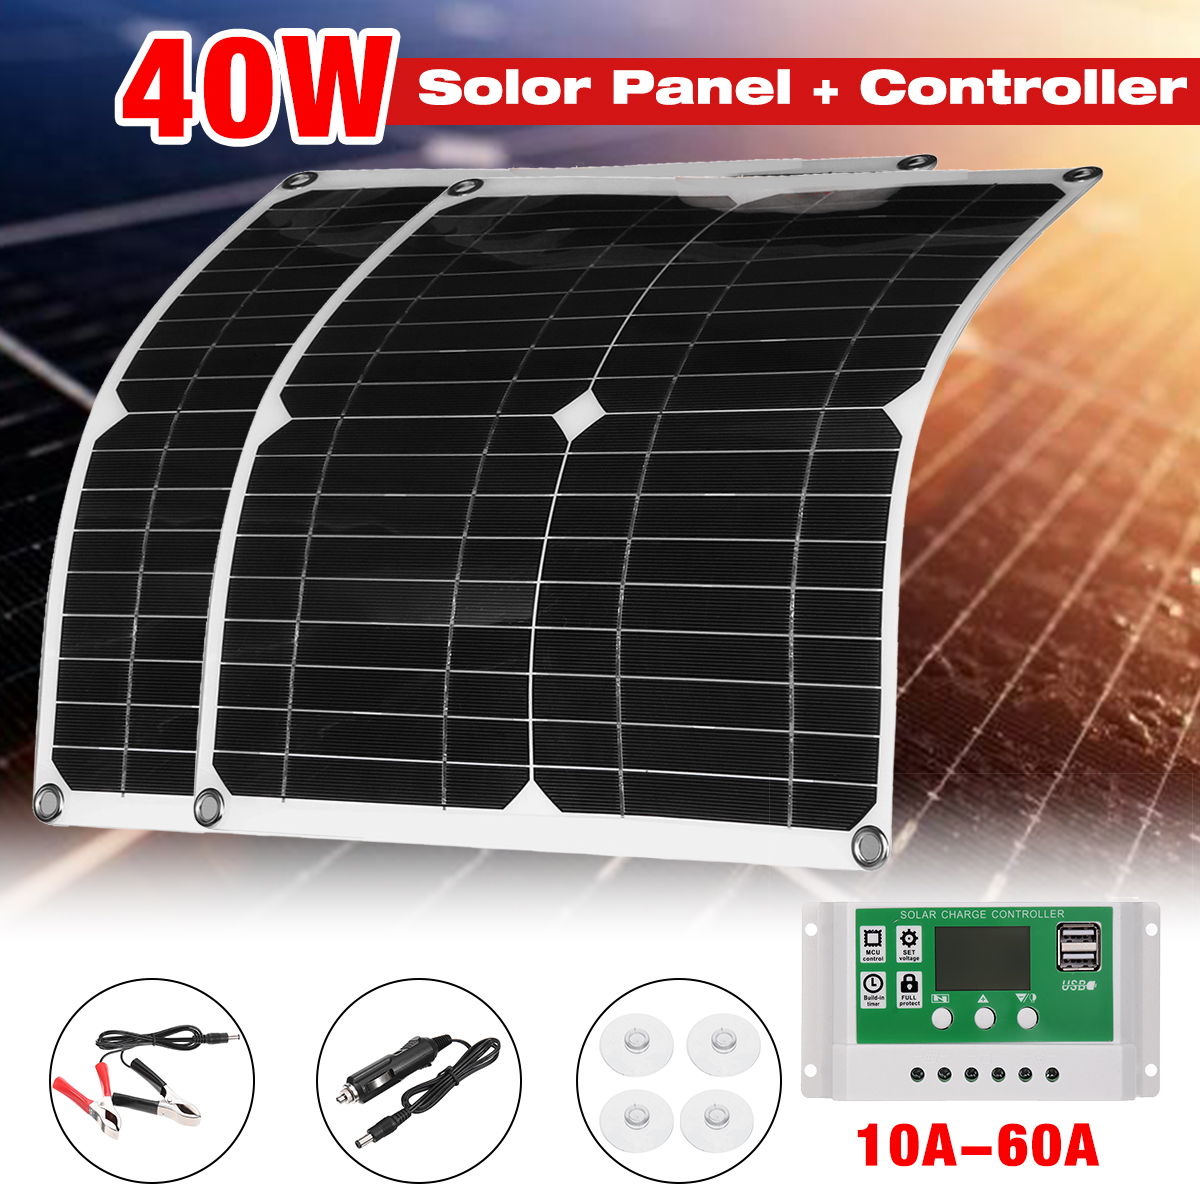 40W-Solar-Panel-Dual-USB-30A-Controller-Solar-Cell-for-Yacht-RV-Battery-Charger-1830193-2